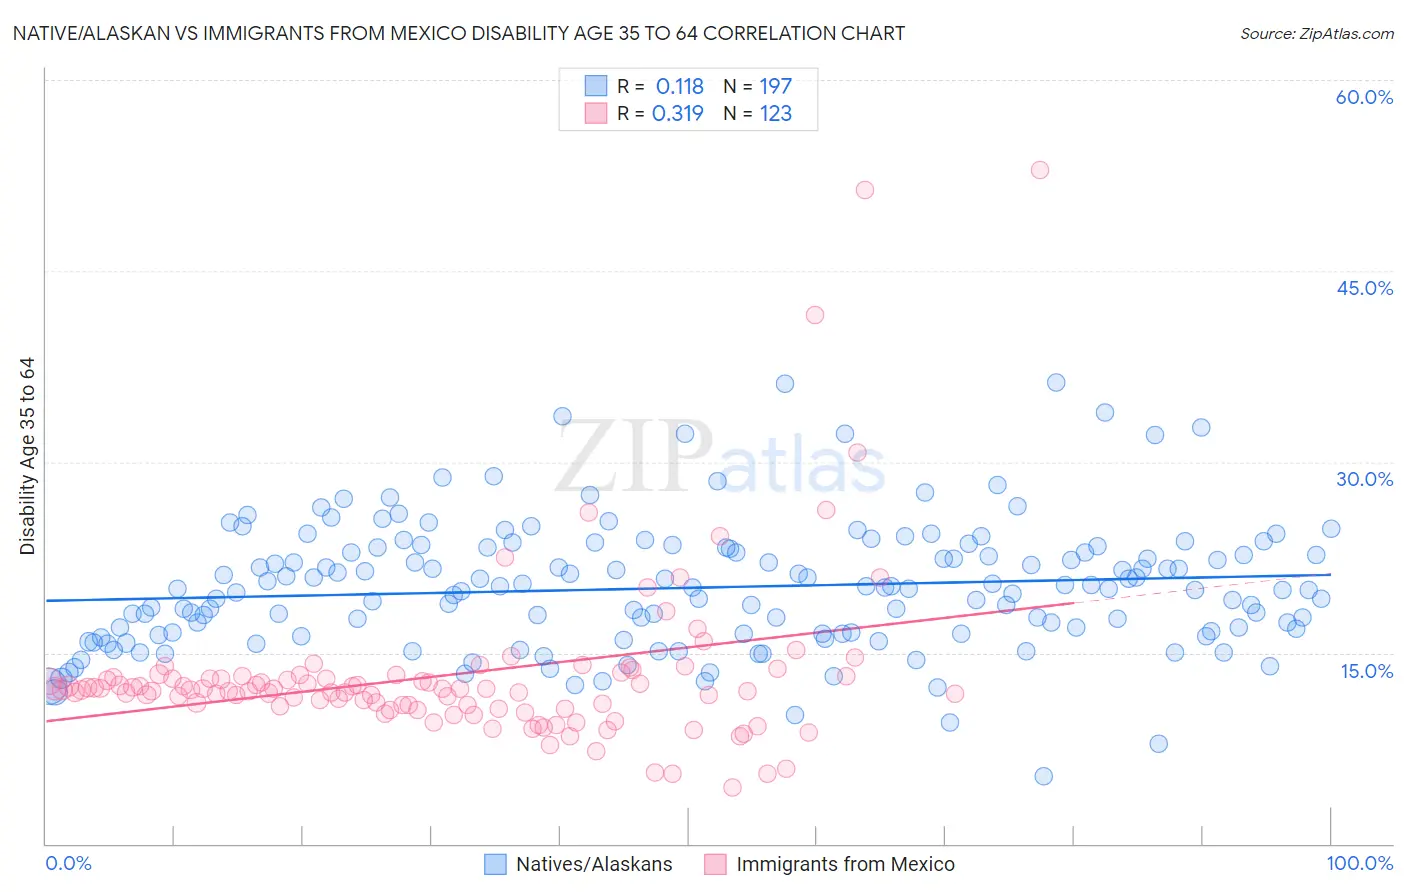 Native/Alaskan vs Immigrants from Mexico Disability Age 35 to 64